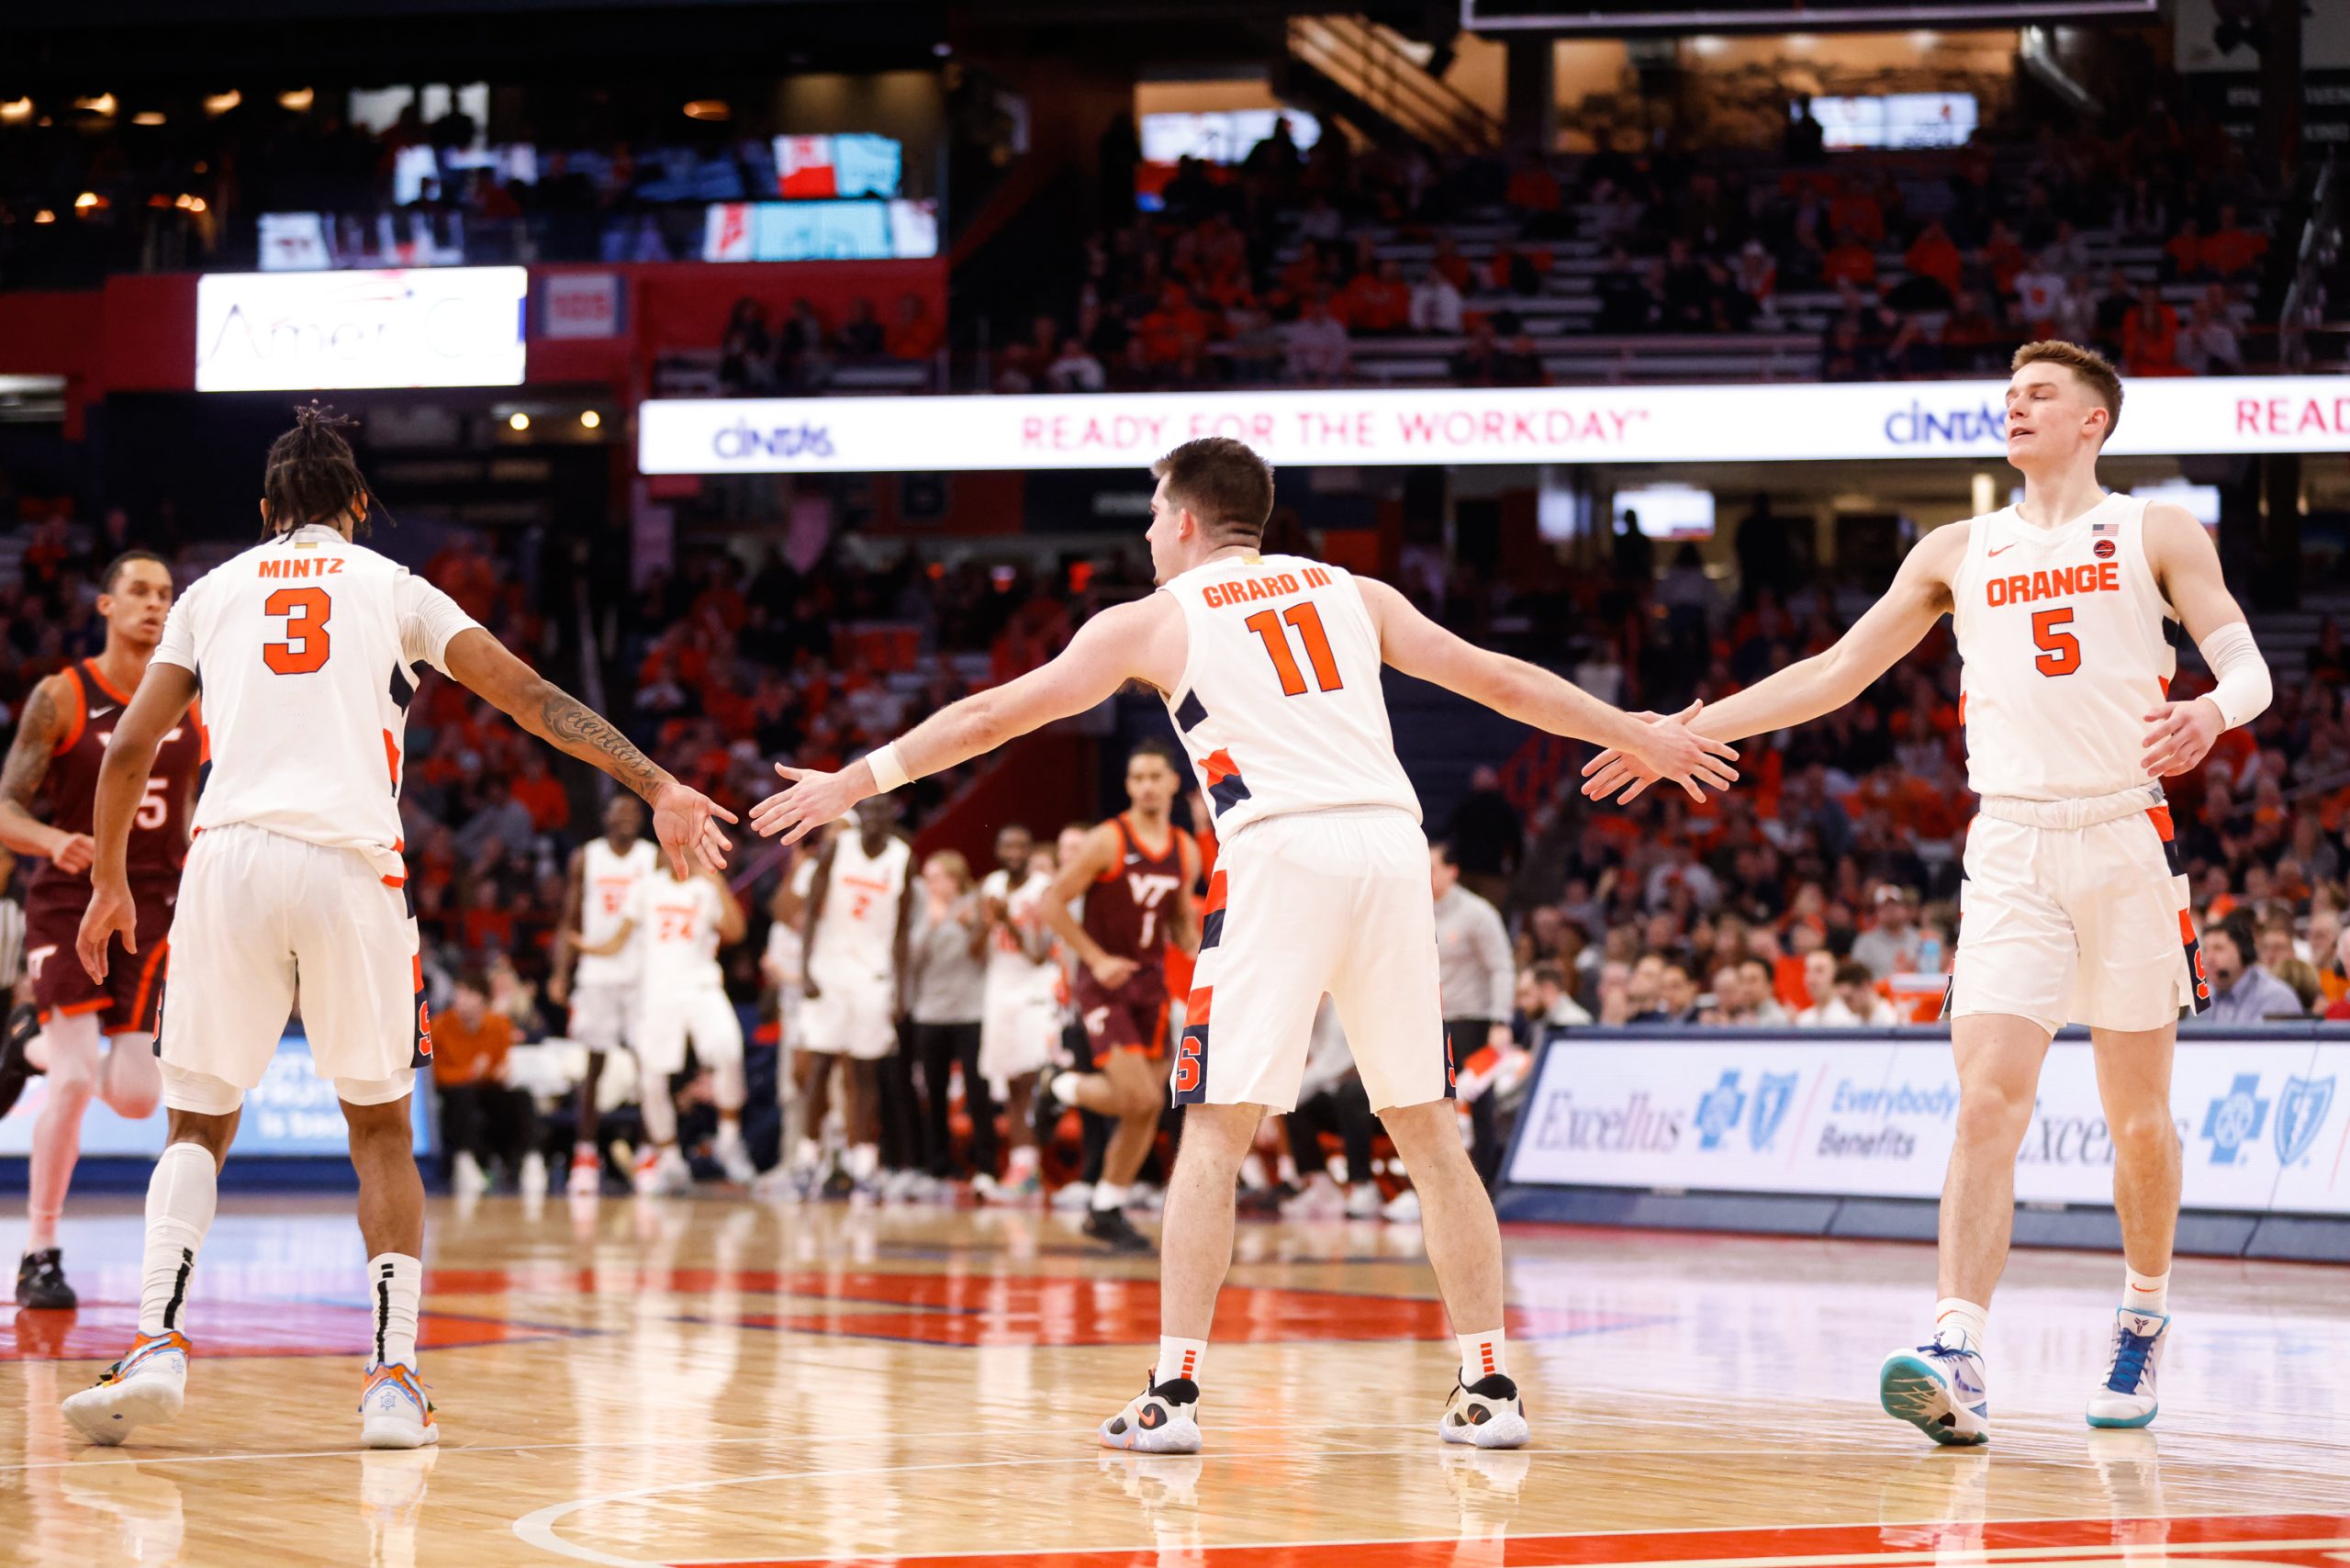 Syracuse's Joseph Girard III (11) high-fives teammates Judah Mintz (3) and Justin Taylor (5) after a three-pointer during an ACC basketball game against Virginia Tech Wednesday at JMA Wireless Dome.